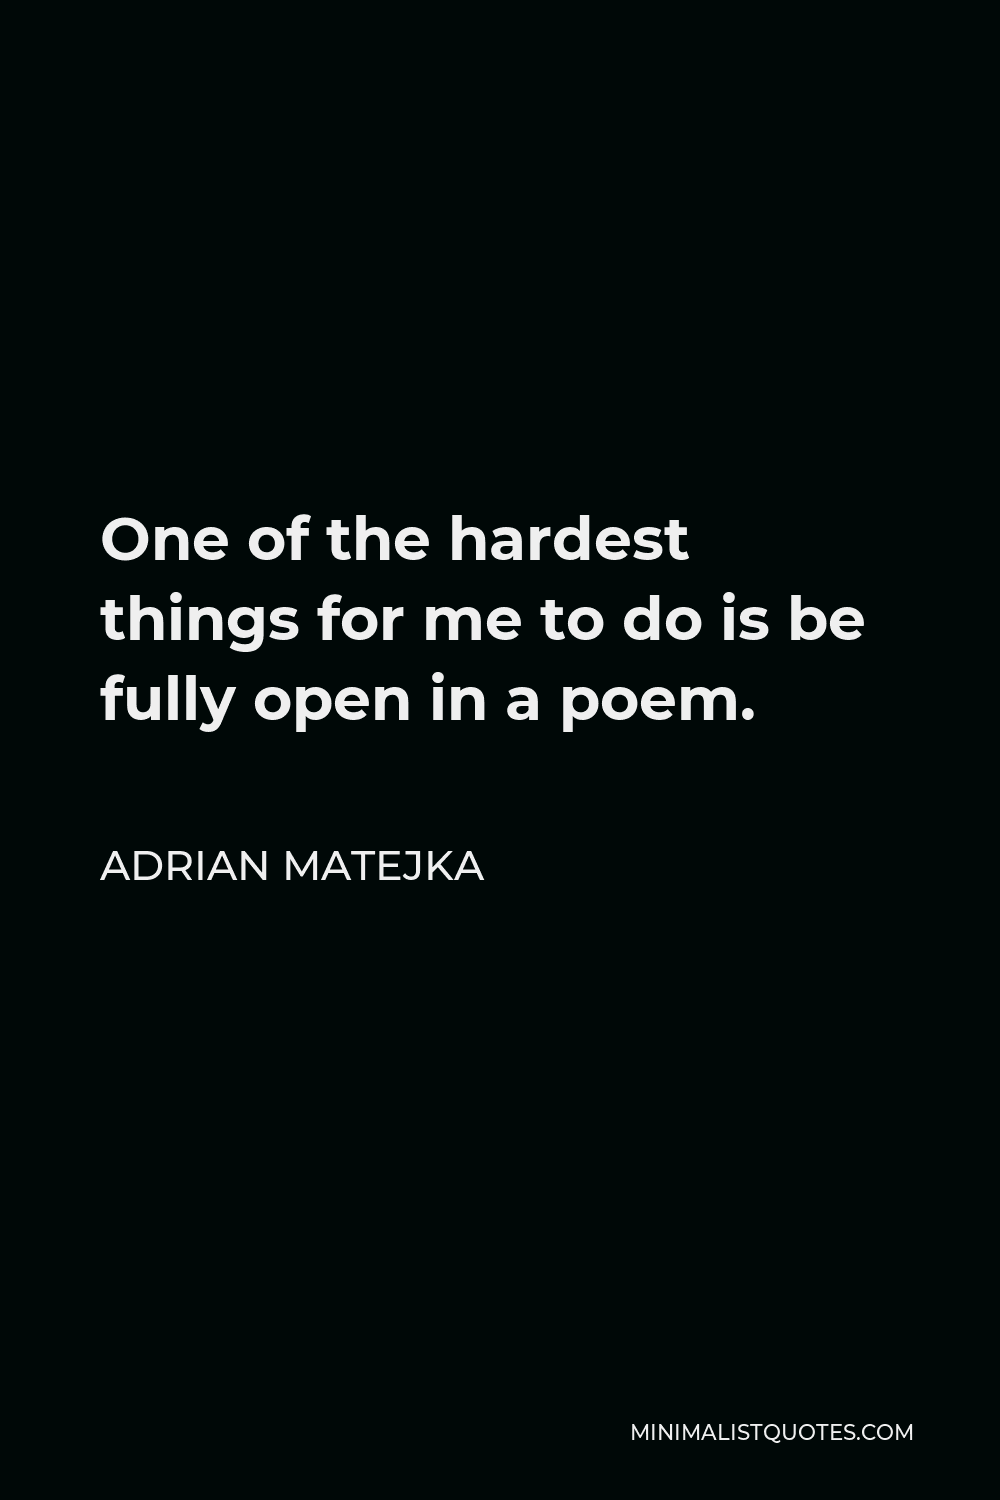 Adrian Matejka Quote - One of the hardest things for me to do is be fully open in a poem.